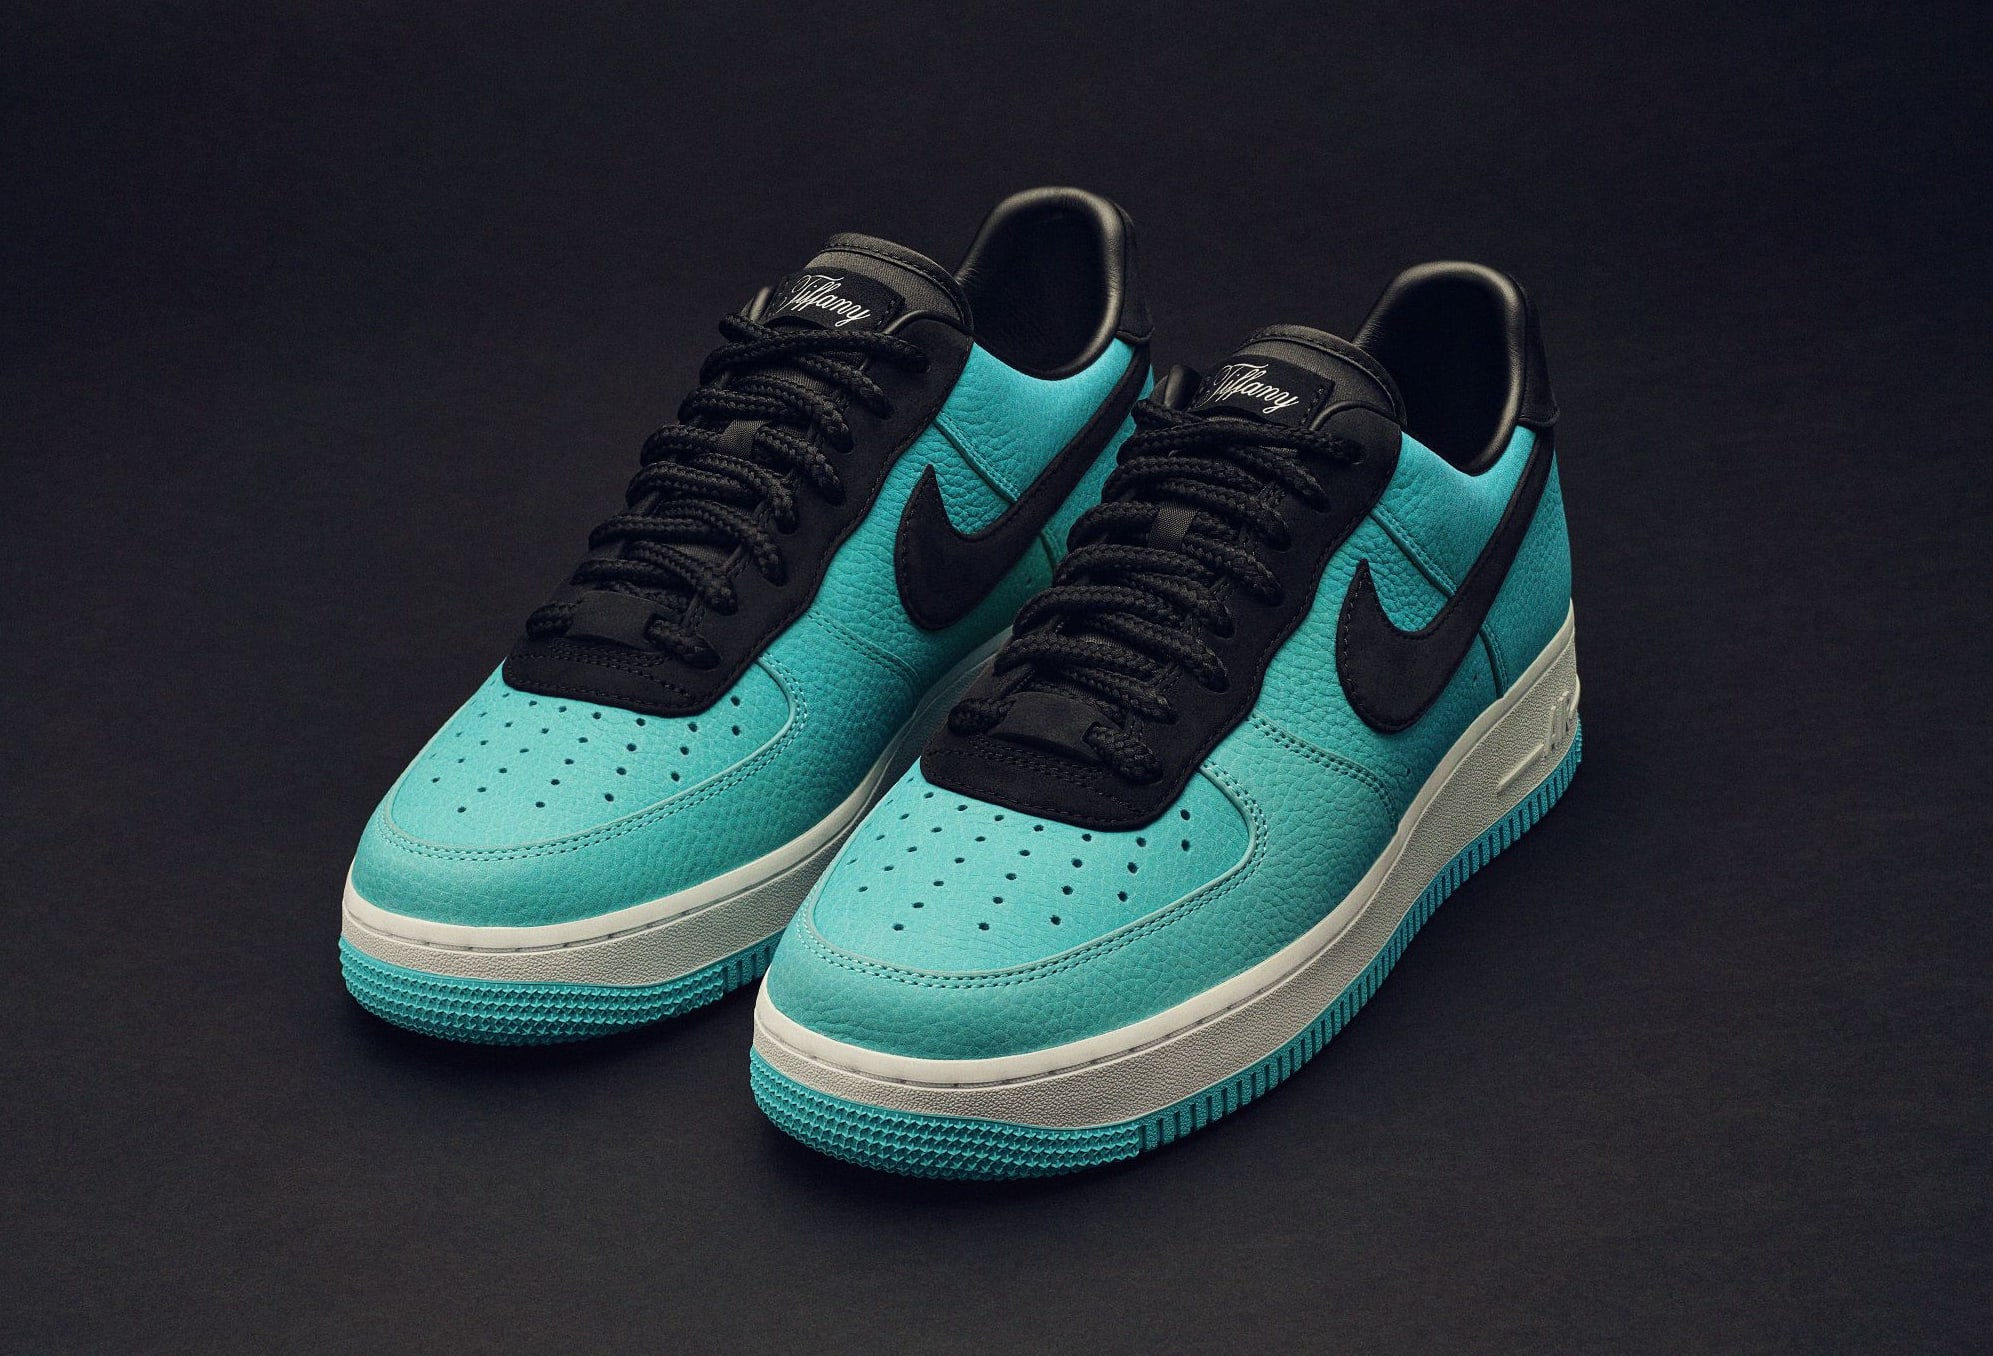 Tiffany and Co. x Nike Air Force 1 1837 'Tiffany Blue' Friends and Family (Pair)